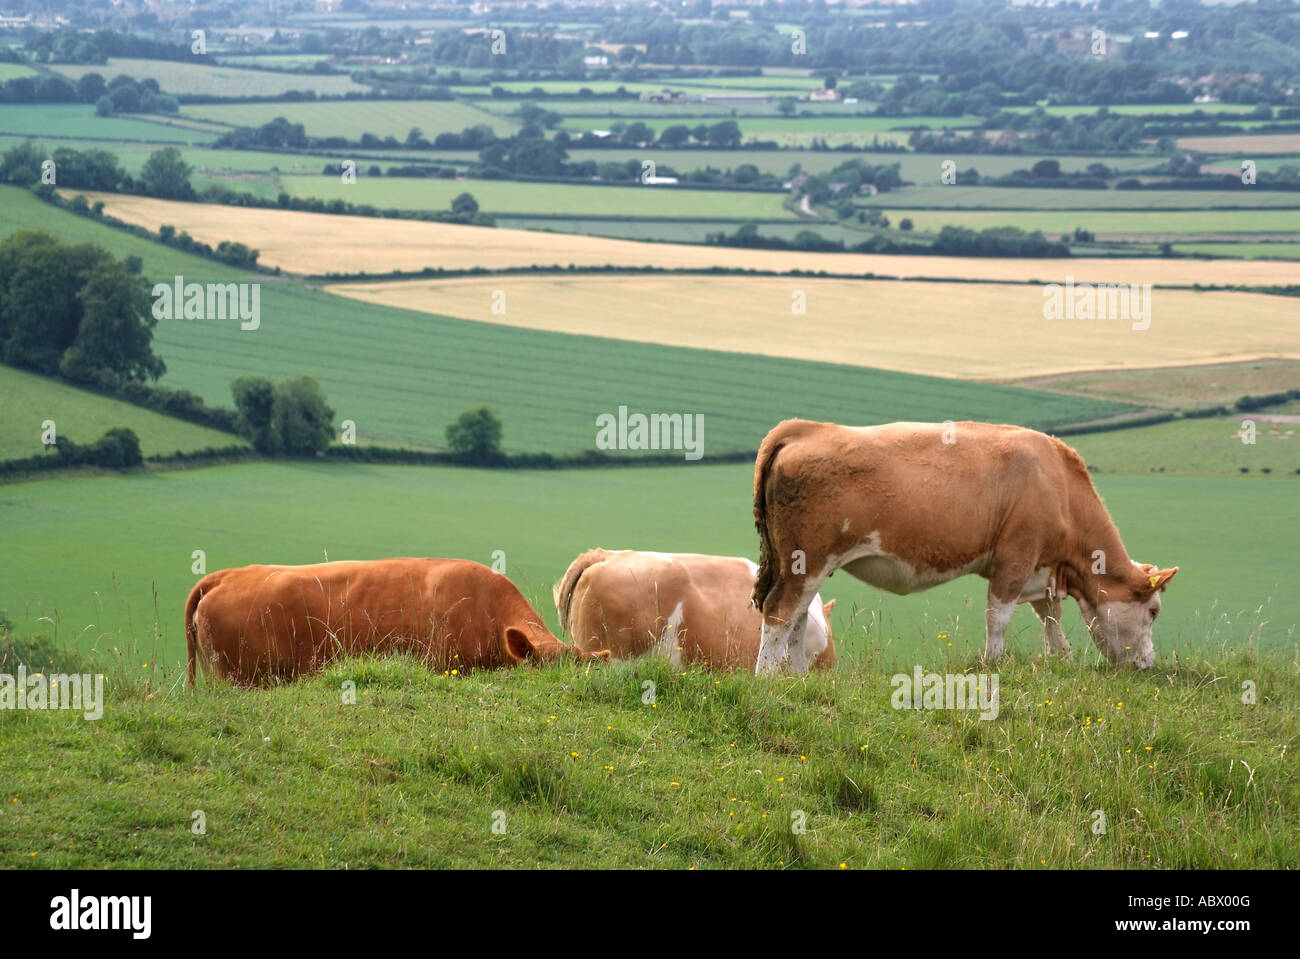 DOMESTIC CATTLE IN DORSET COUNTRYSIDE. ENGLAND. UK Stock Photo